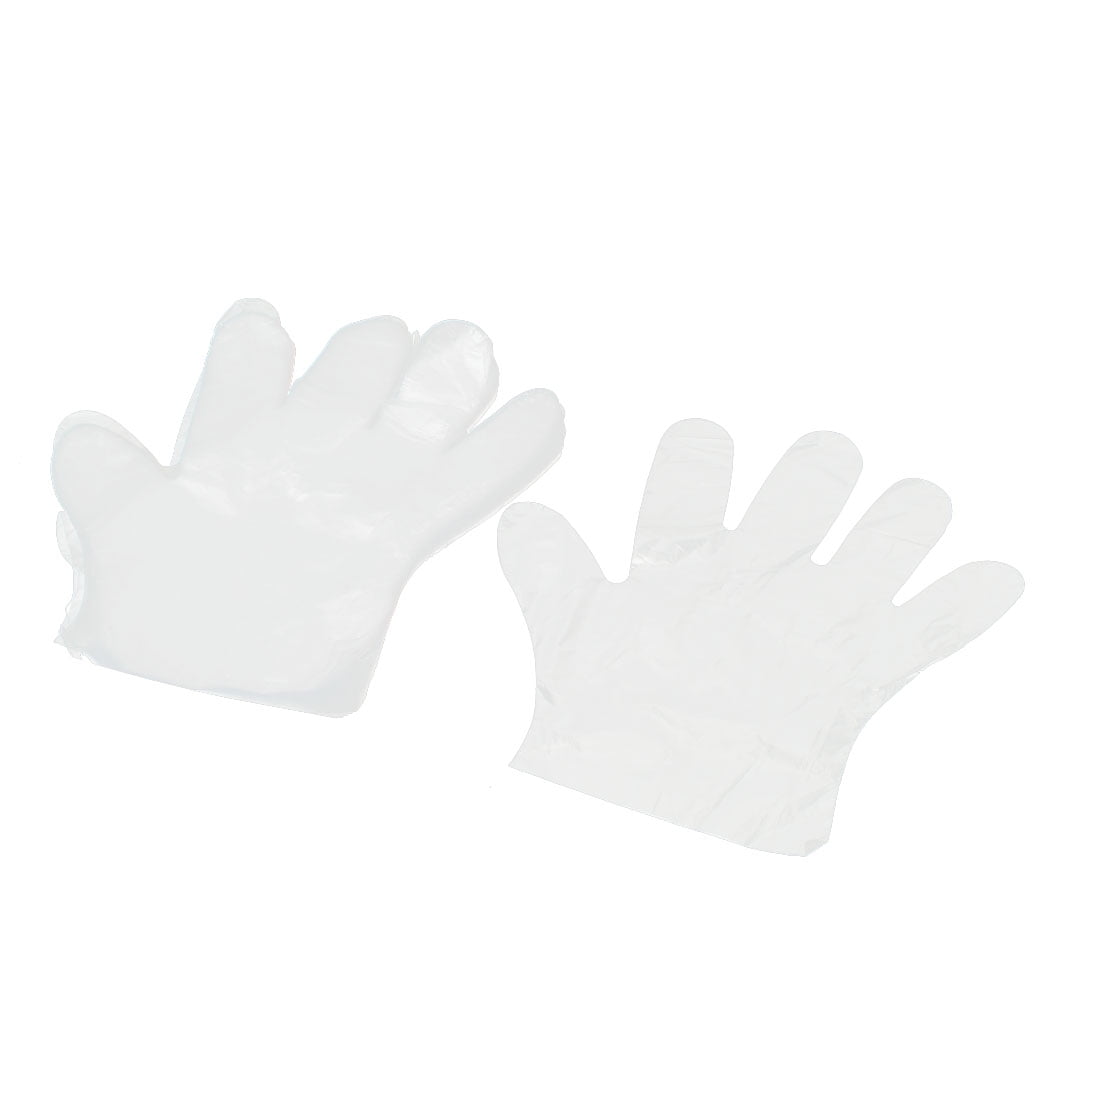 100 Pcs Clear Kitchen Food Service Hand Protective Disposable Gloves ...